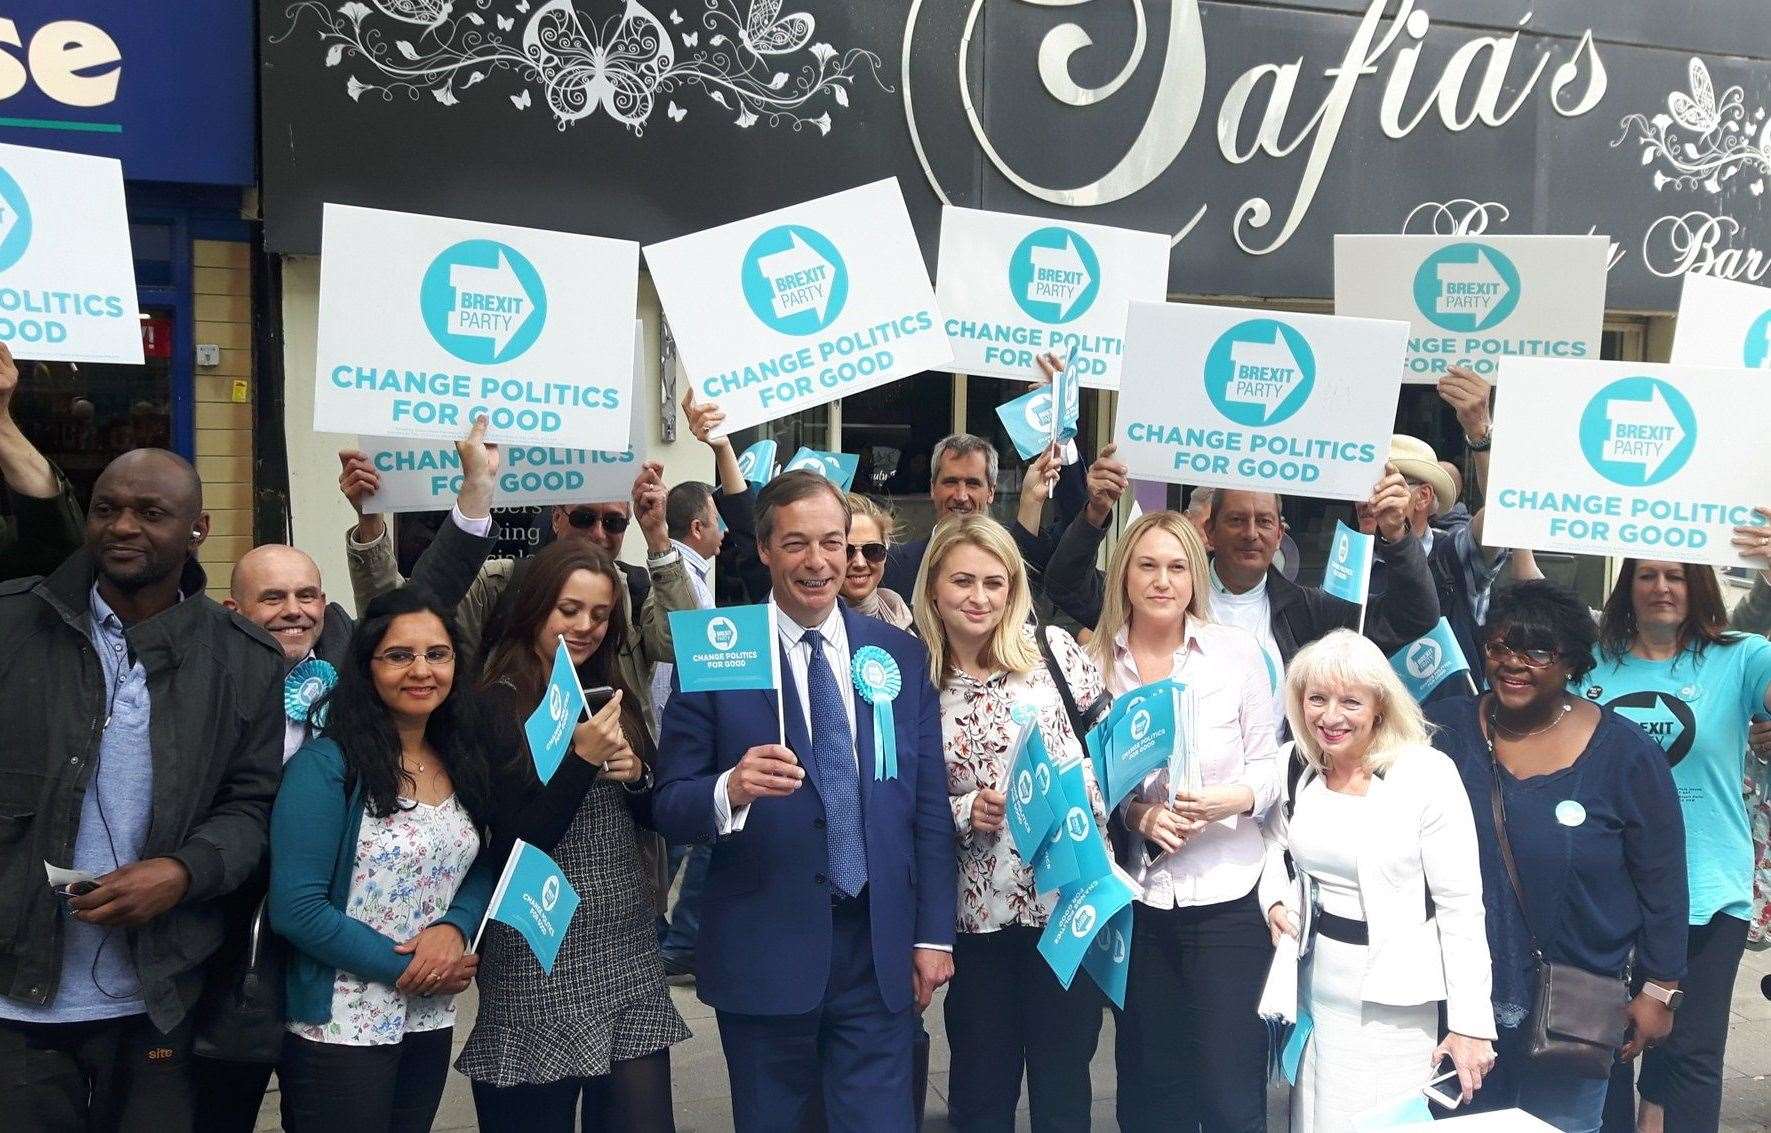 Nigel Farage with Brexit Party supporters in Gravesend